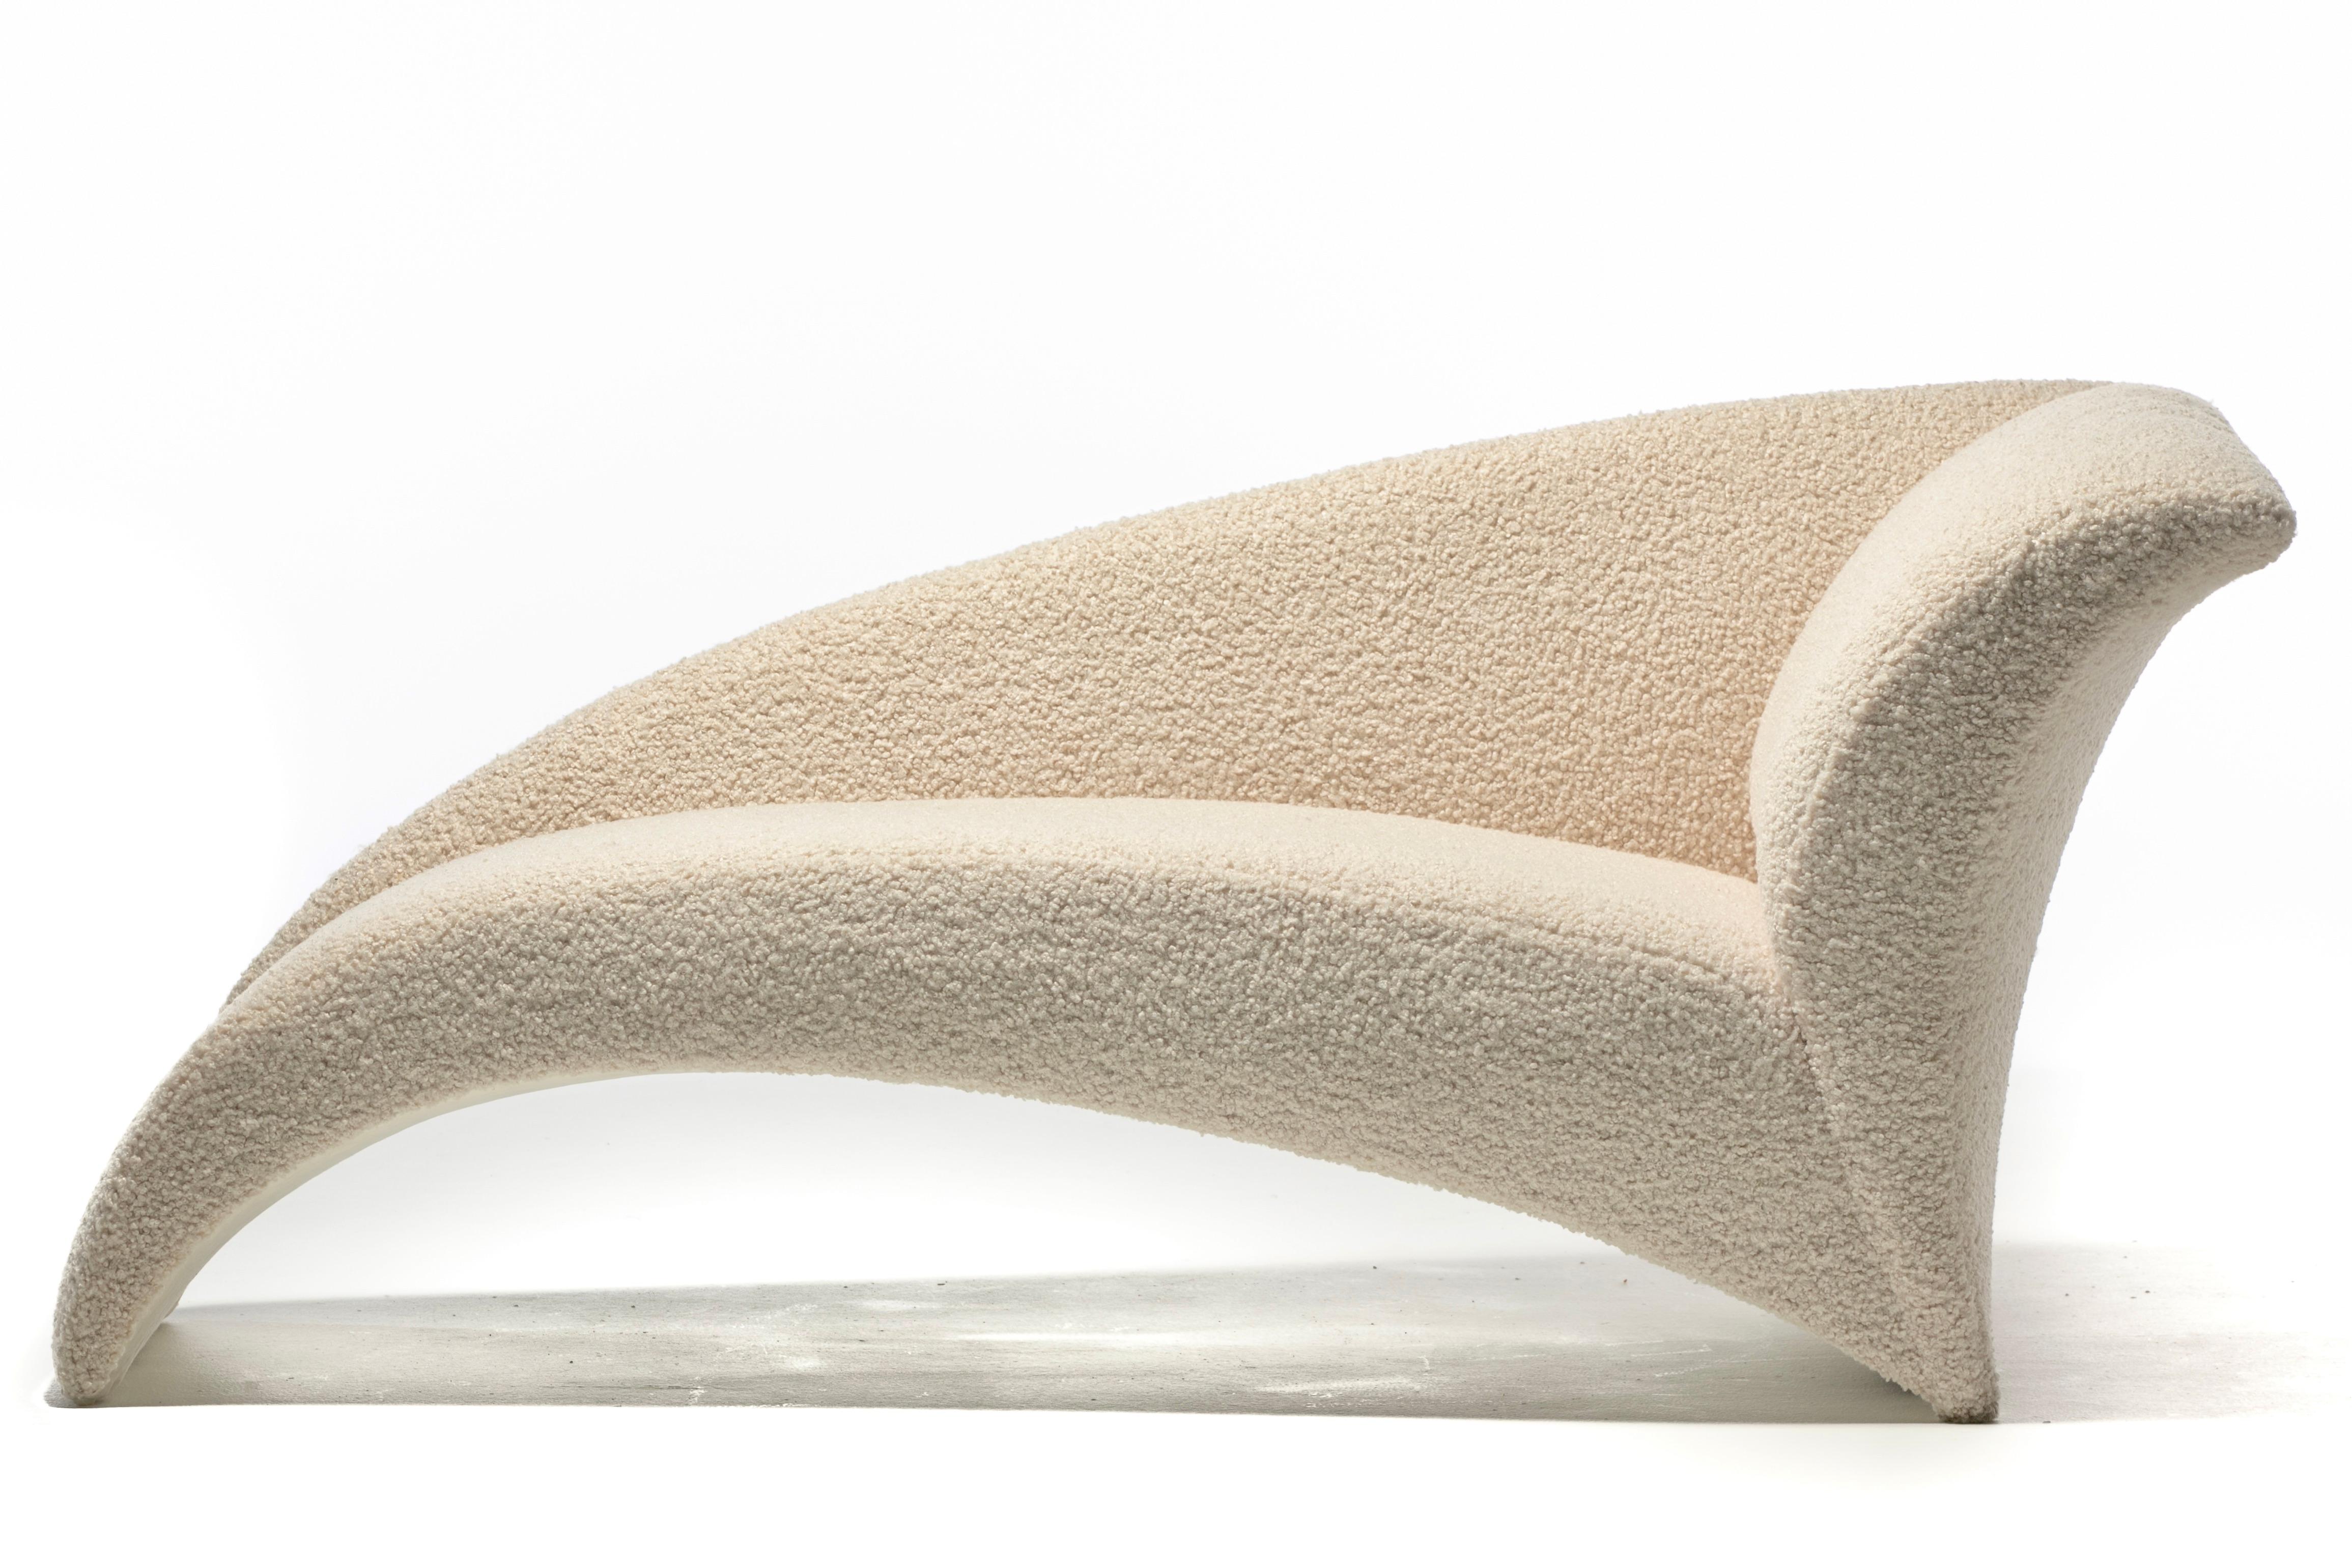 Vladimir Kagan Post Modern Marilyn Chaise Lounge in Ivory White Bouclé c. 1986 For Sale 10